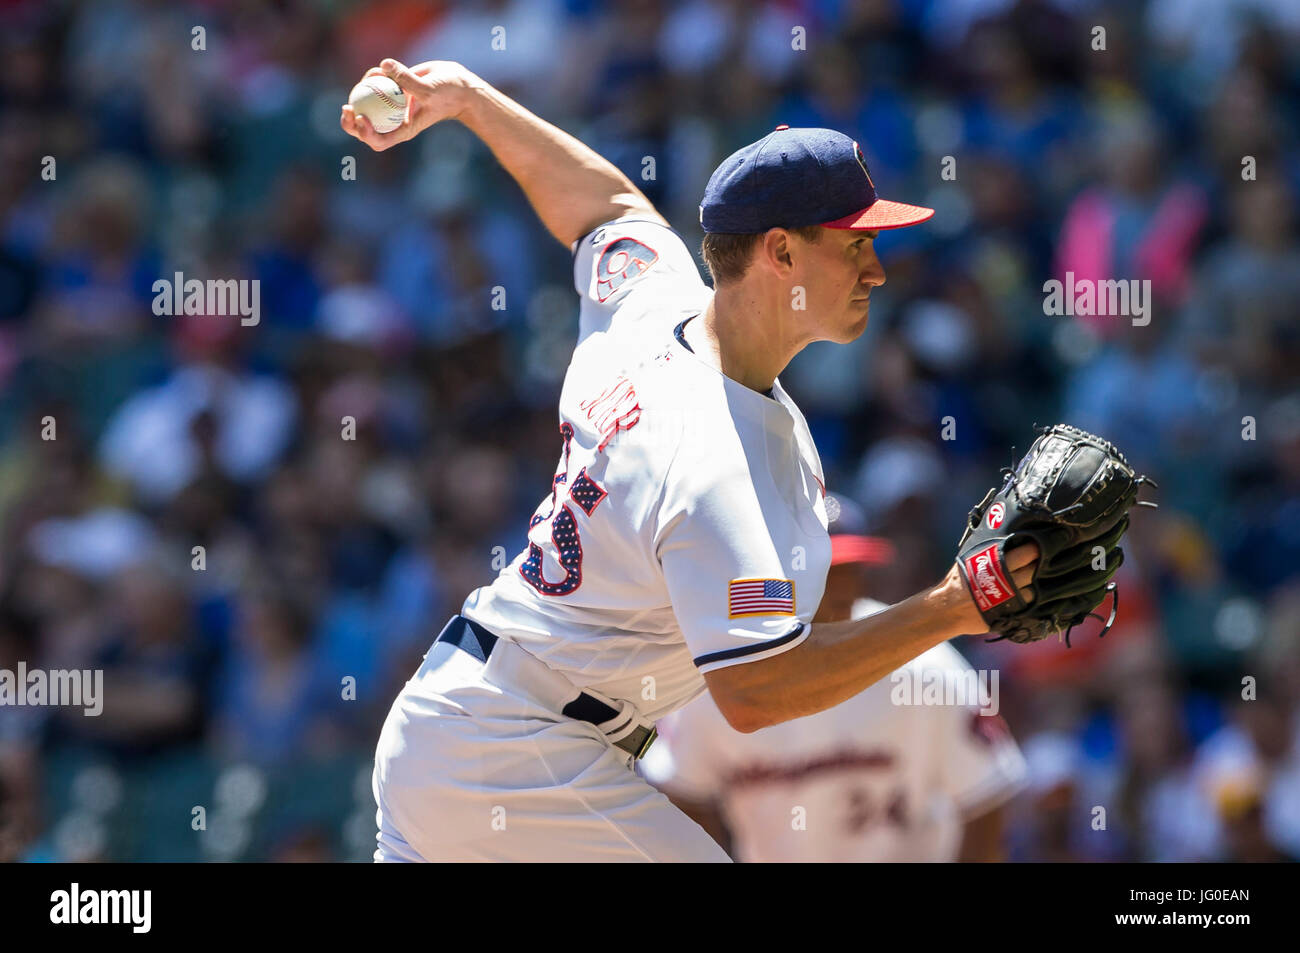 Milwaukee, USA. 03rd July, 2017. Milwaukee Brewers relief pitcher Brent Suter #35 delivers a pitch in the first inning of the Major League Baseball game between the Milwaukee Brewers and the Baltimore Orioles at Miller Park in Milwaukee, WI. John Fisher/CSM/Alamy Live News Stock Photo